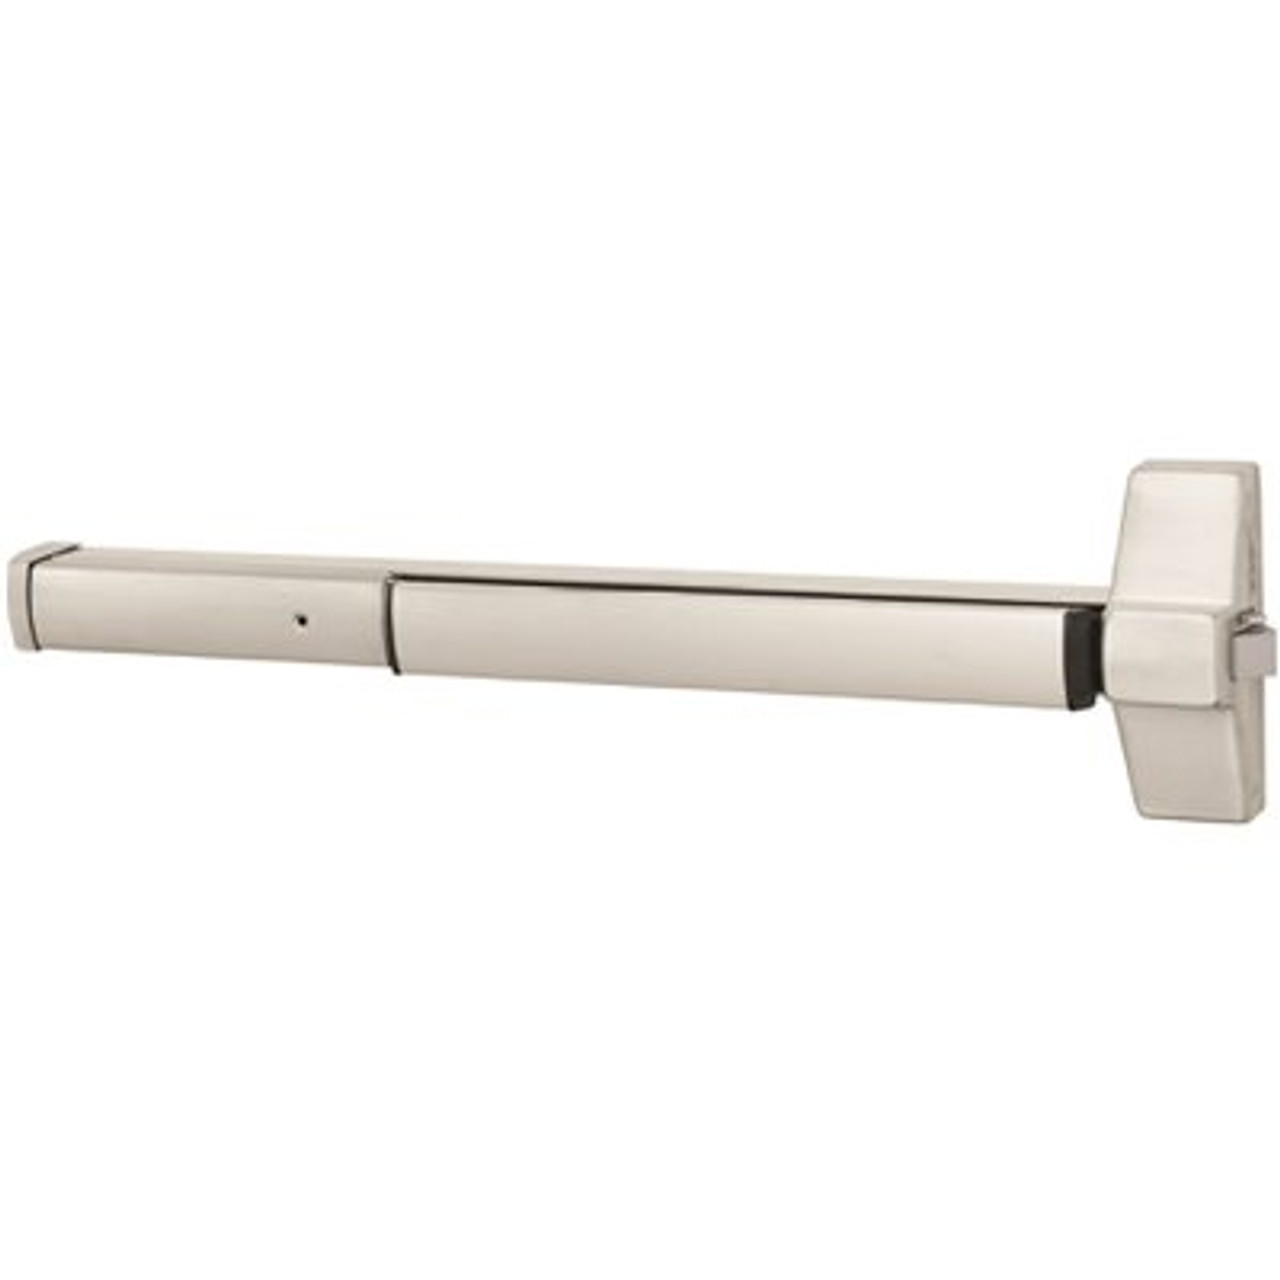 Corbin Russwin Ed5000 Series Grade 1,36 In. Stainless Steel Finish Electrified Delayed Egress Surface Exit Device